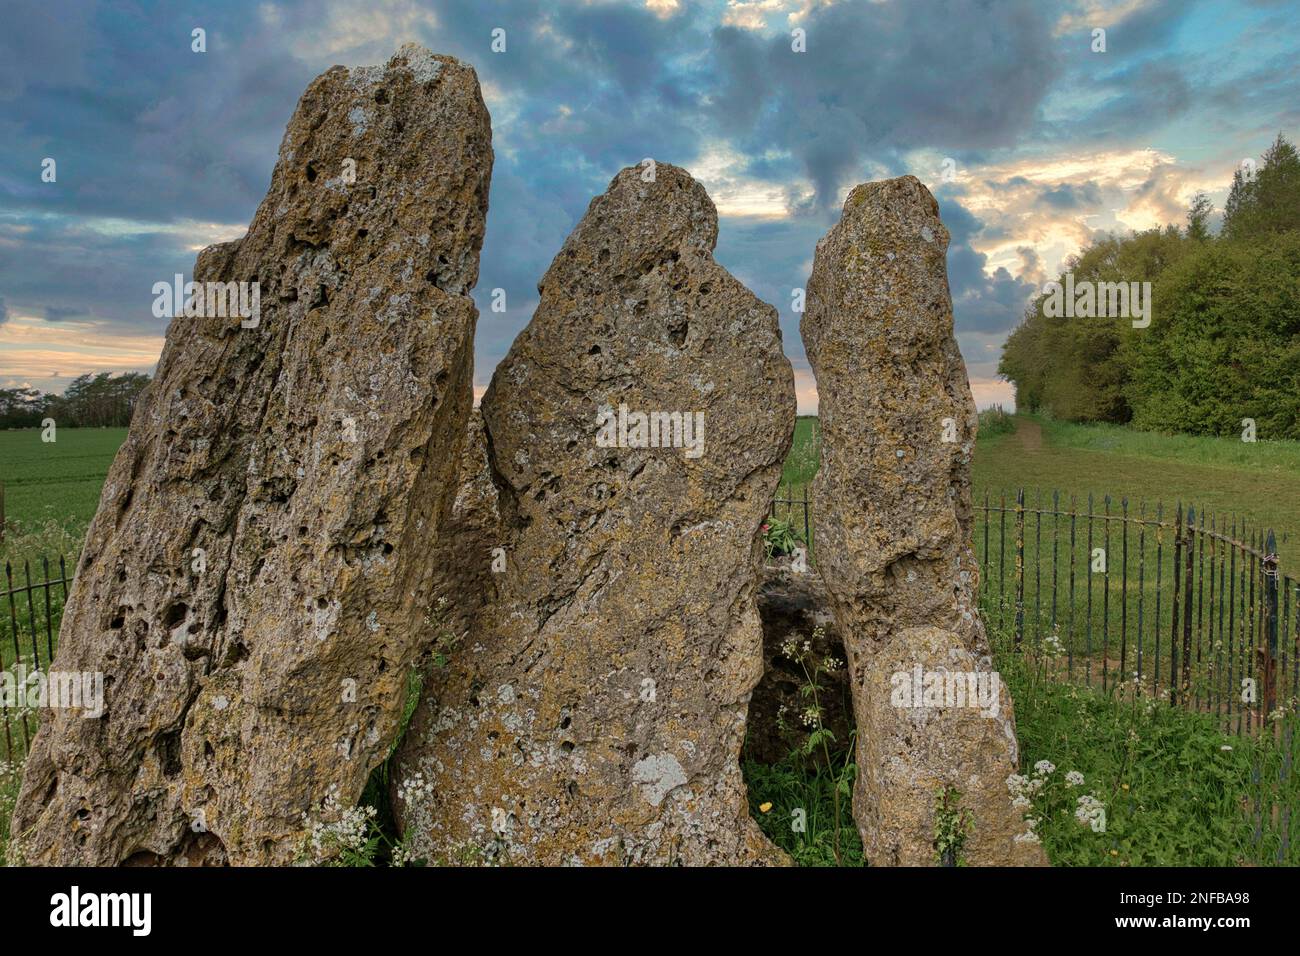 The Whispering Knights Rollright Stones, Oxfordshire, Royaume-Uni Banque D'Images